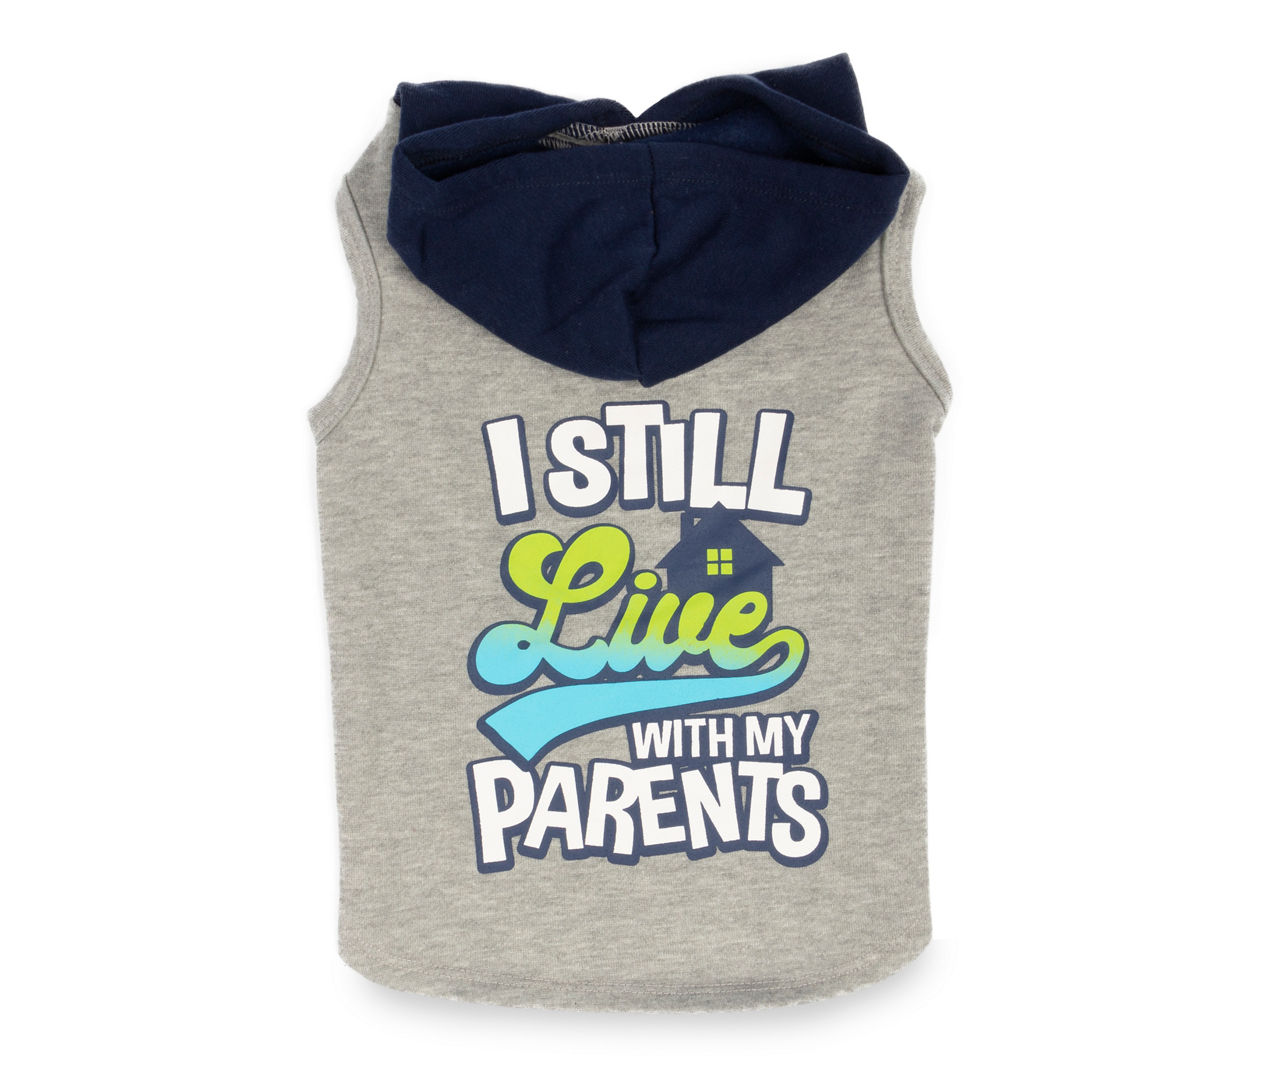 "Live With My Parents" Pet X-Large Gray & Blue Hoodie